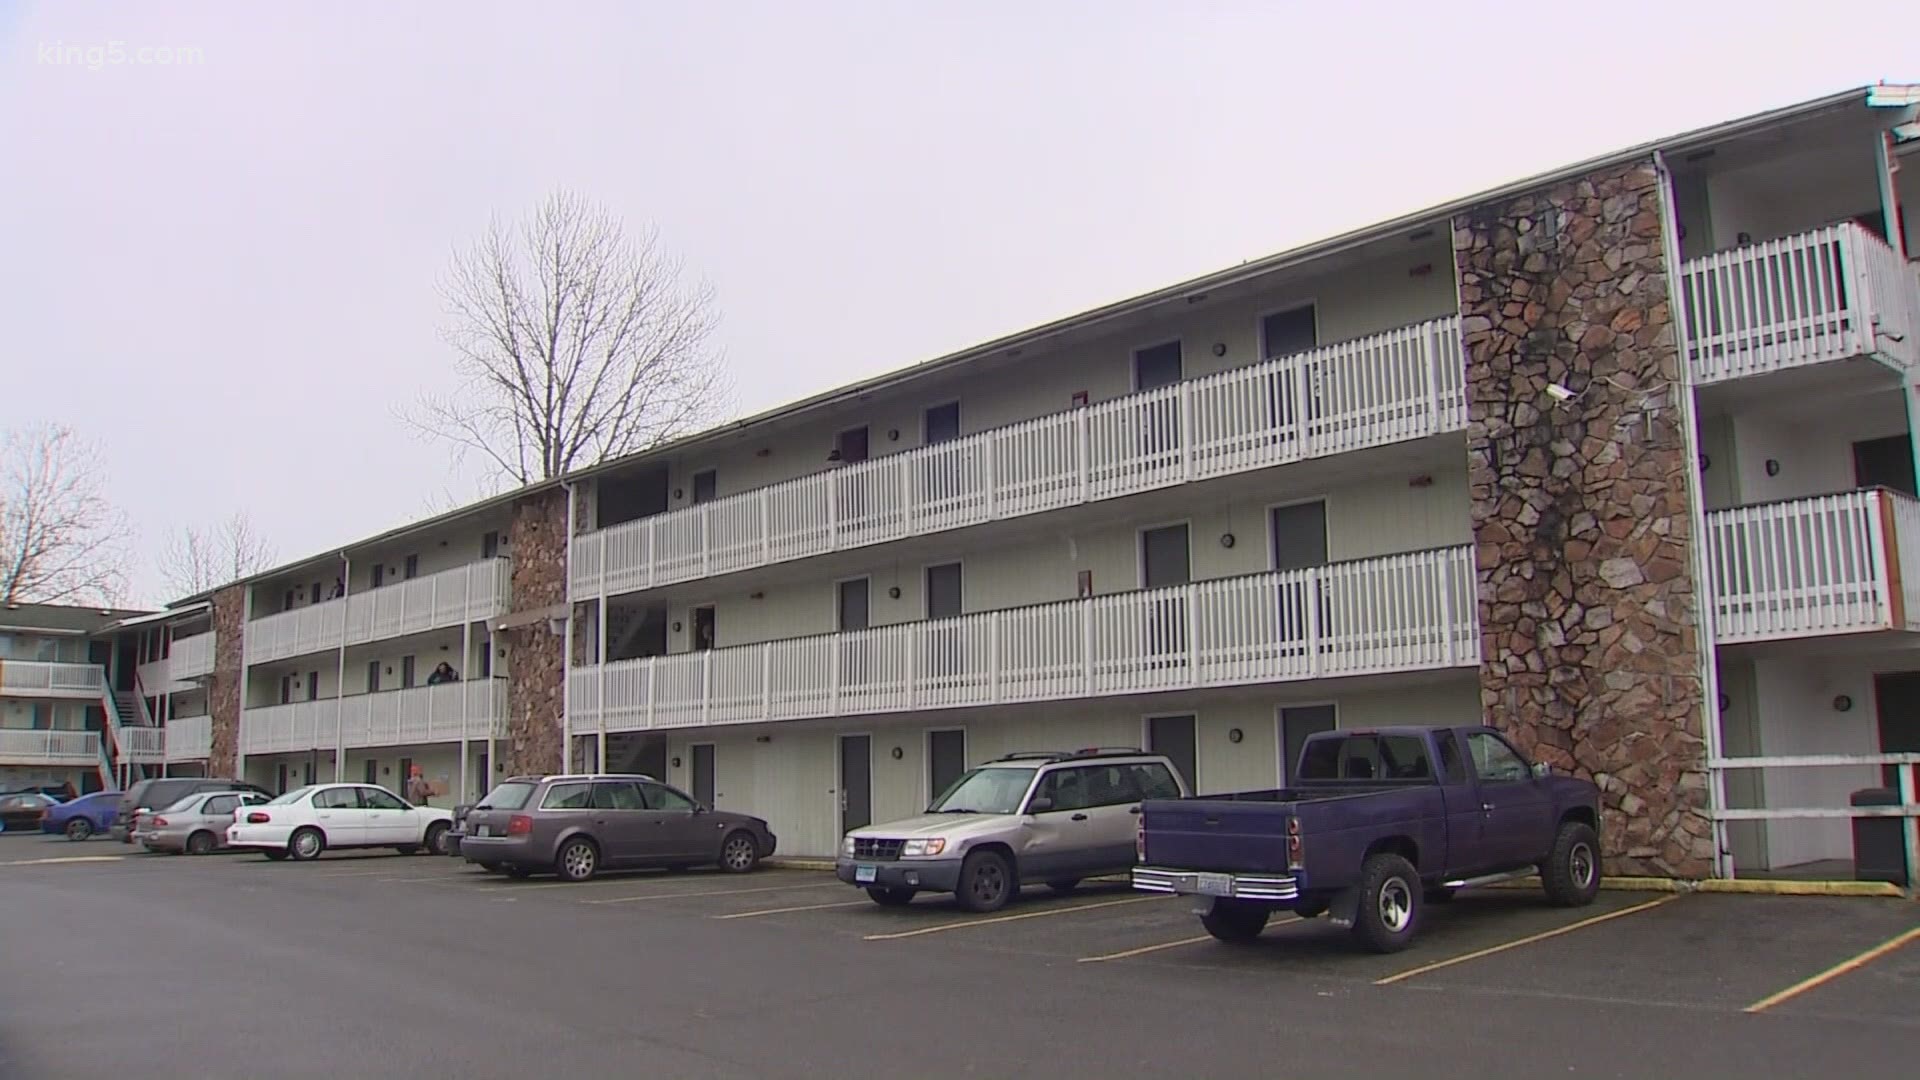 Tacoma Housing Now booked 15 rooms for Christmas Eve for people who are homeless. The organization says they won't leave until the city or county pays for their stay